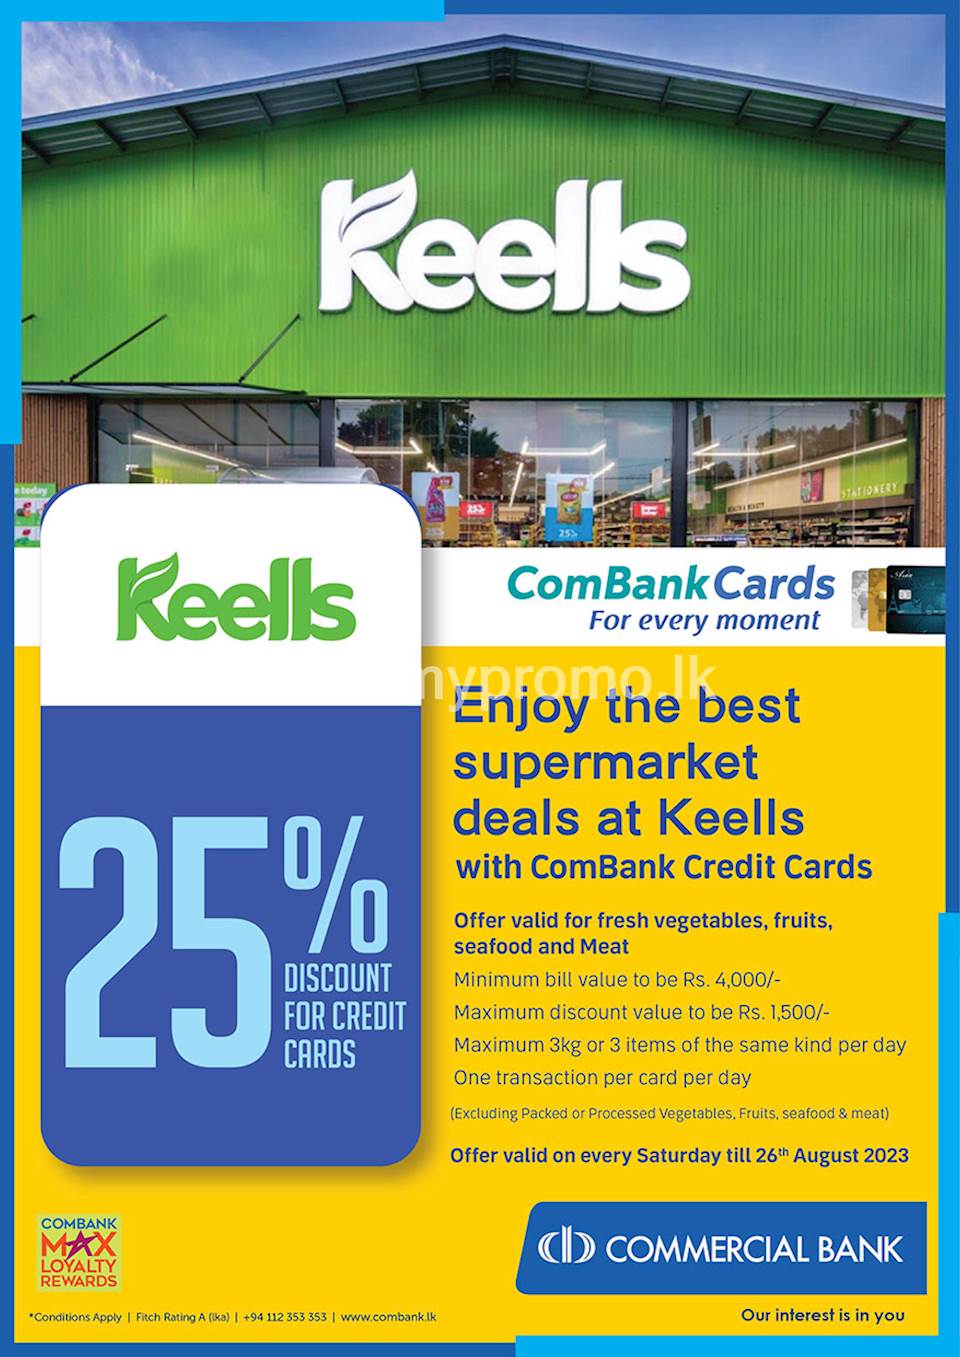 Enjoy the best supermarket deals at Keells with ComBank Credit Cards